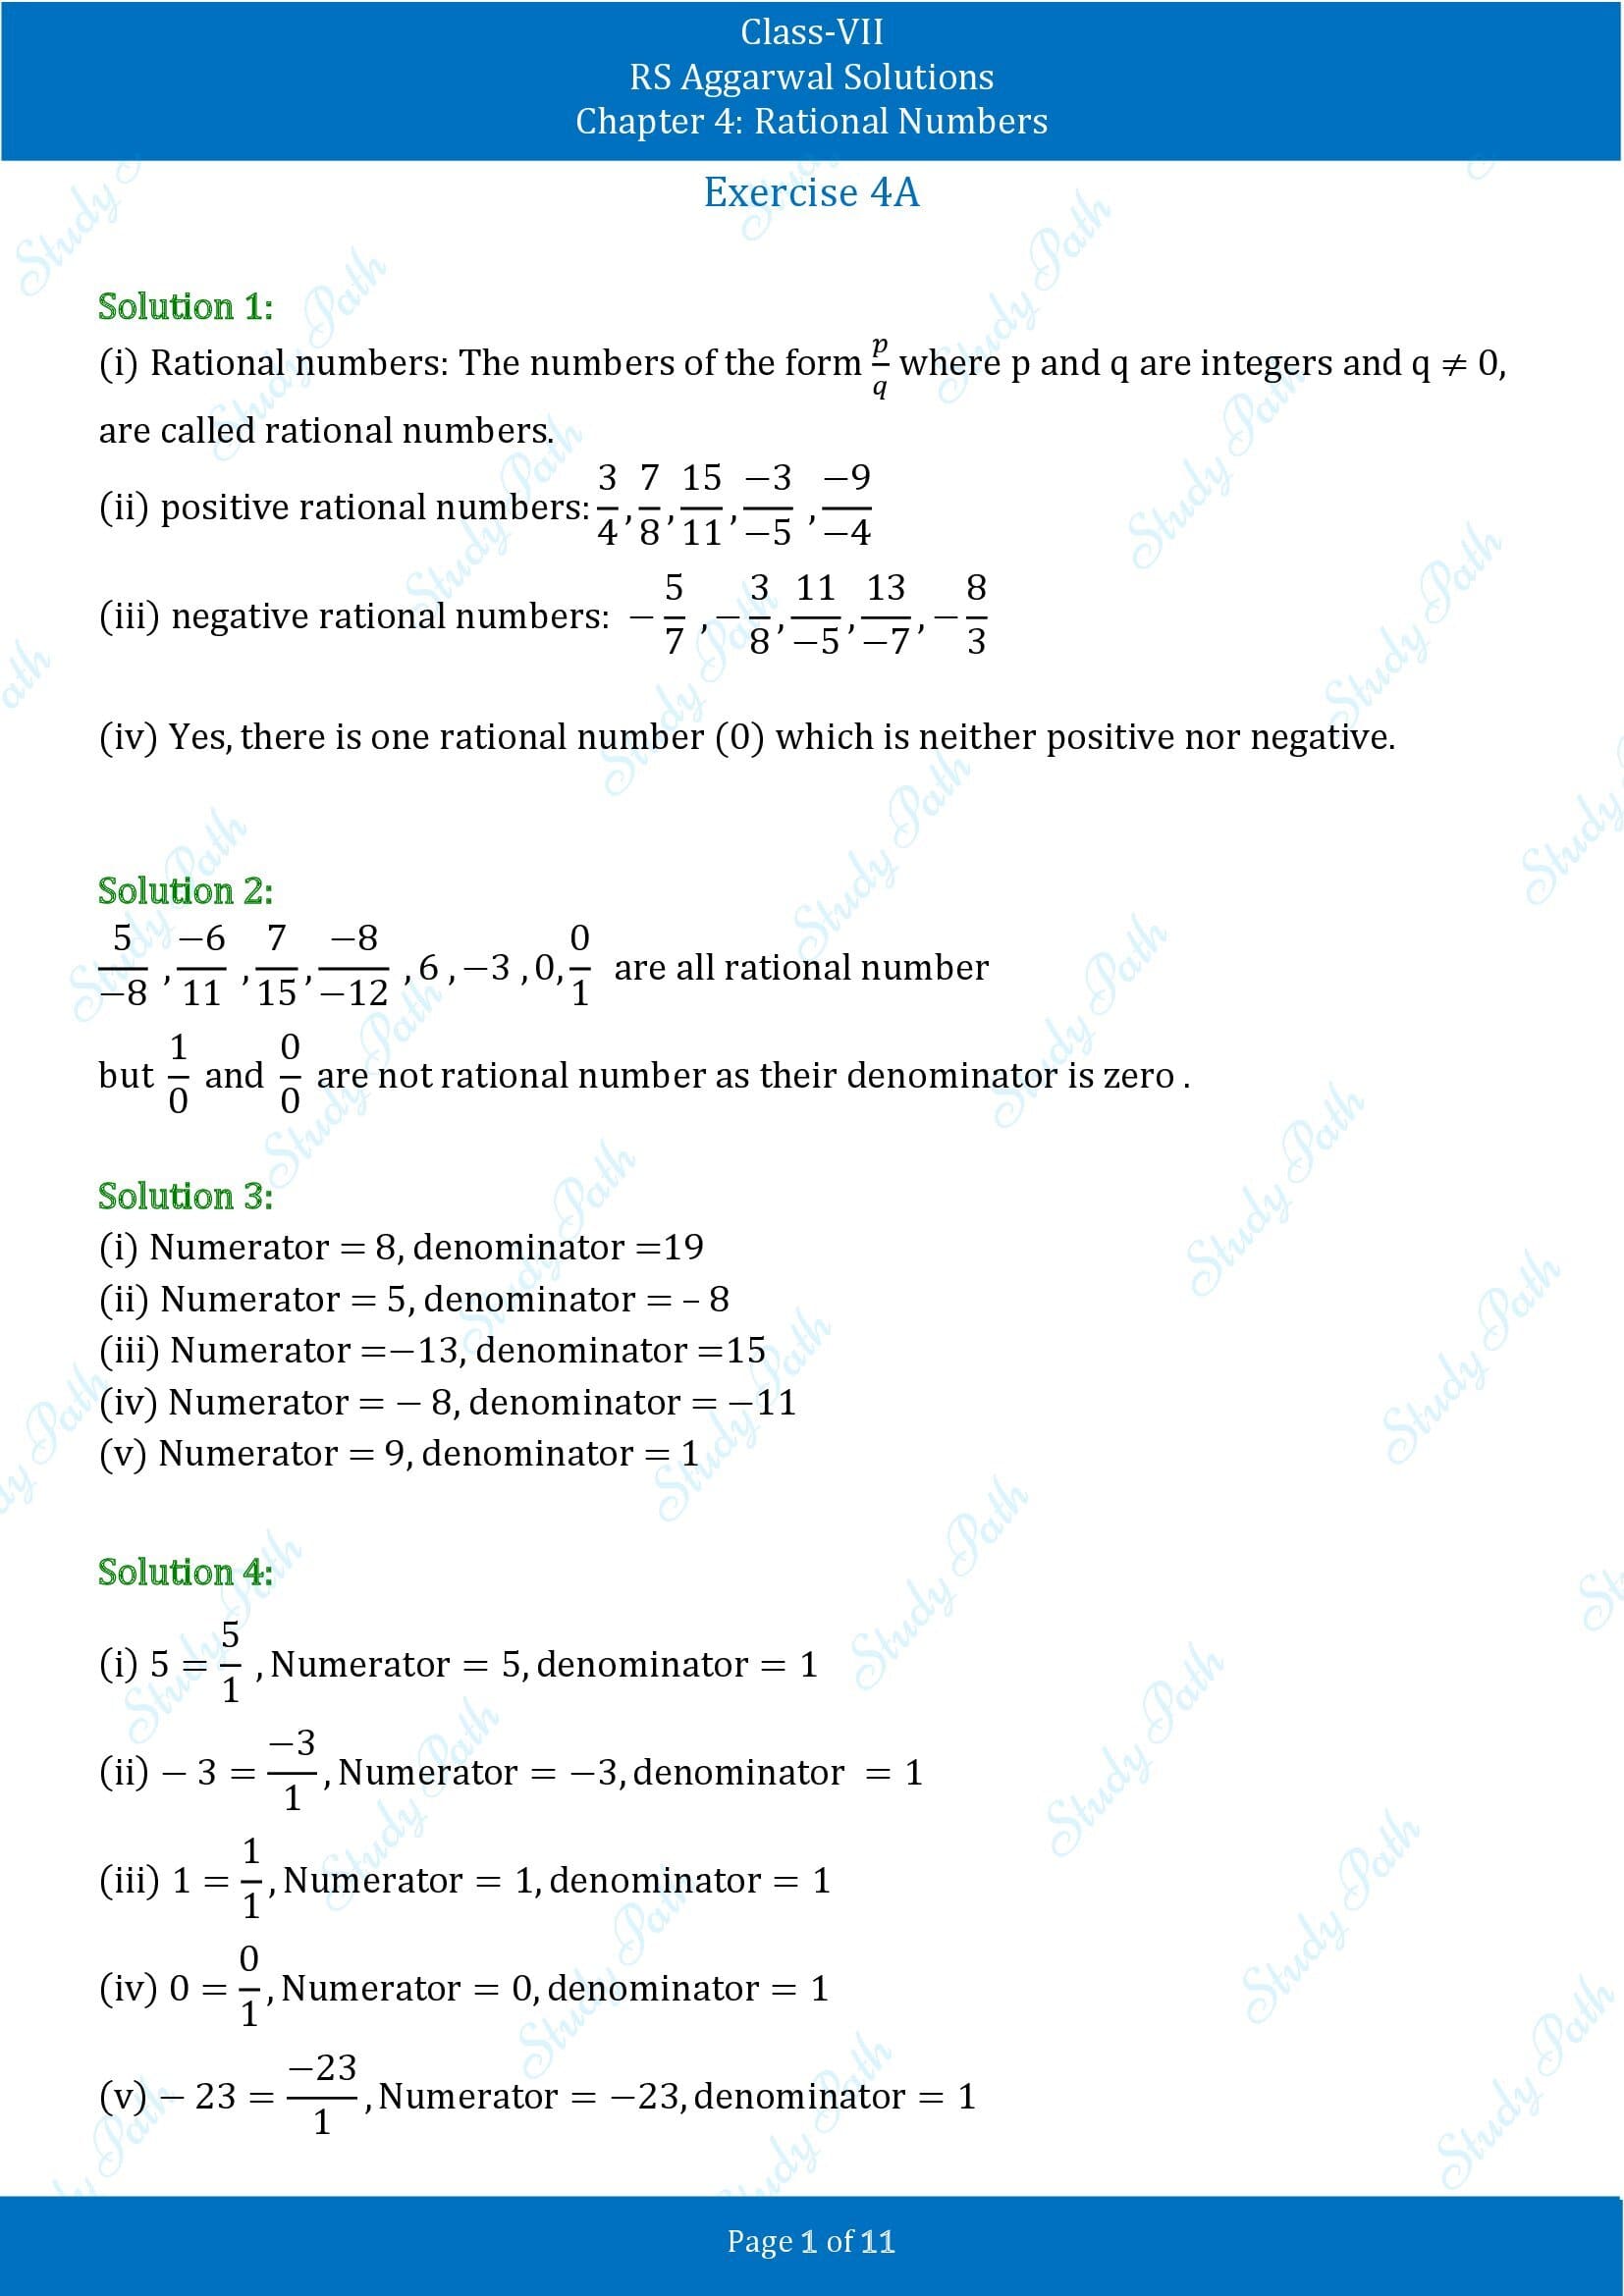 RS Aggarwal Solutions Class 7 Chapter 4 Rational Numbers Exercise 4A 00001